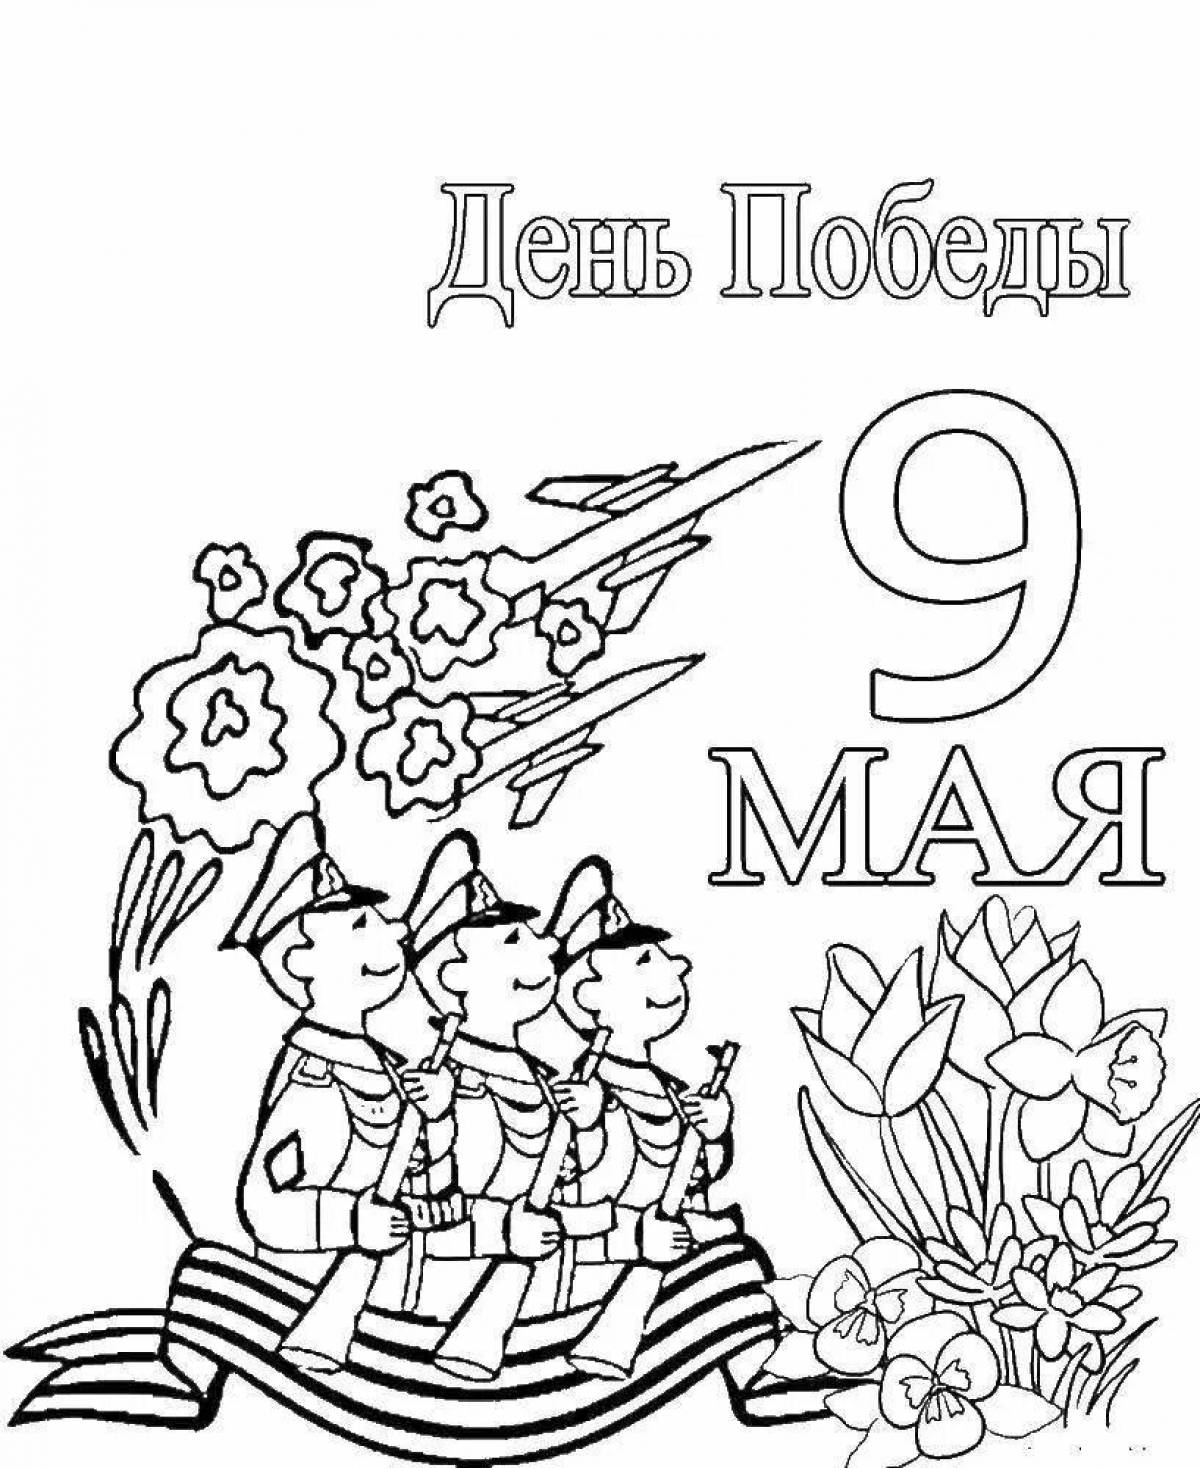 Violent Victory Day coloring for kids